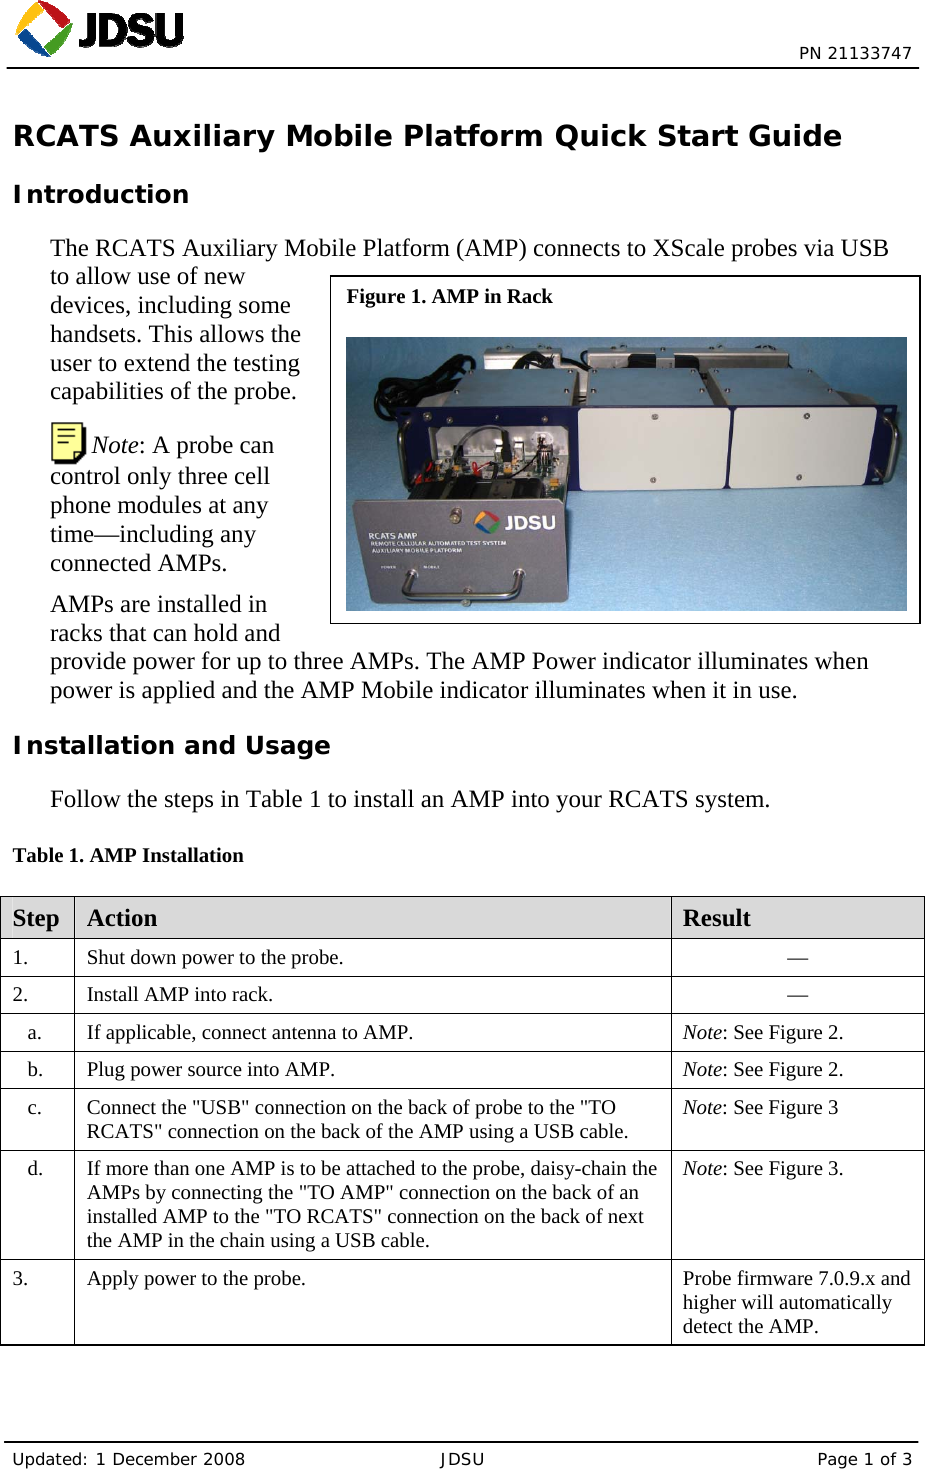  PN 21133747 Updated: 1 December 2008  JDSU  Page 1 of 3 Figure 1. AMP in Rack RCATS Auxiliary Mobile Platform Quick Start Guide Introduction The RCATS Auxiliary Mobile Platform (AMP) connects to XScale probes via USB to allow use of new devices, including some handsets. This allows the user to extend the testing capabilities of the probe.  Note: A probe can control only three cell phone modules at any time—including any connected AMPs. AMPs are installed in racks that can hold and provide power for up to three AMPs. The AMP Power indicator illuminates when power is applied and the AMP Mobile indicator illuminates when it in use. Installation and Usage Follow the steps in Table 1 to install an AMP into your RCATS system. Table 1. AMP Installation Step  Action  Result 1.    Shut down power to the probe.  — 2.   Install AMP into rack.  — a.    If applicable, connect antenna to AMP.  Note: See Figure 2. b.    Plug power source into AMP.  Note: See Figure 2. c.    Connect the &quot;USB&quot; connection on the back of probe to the &quot;TO RCATS&quot; connection on the back of the AMP using a USB cable.  Note: See Figure 3 d.    If more than one AMP is to be attached to the probe, daisy-chain the AMPs by connecting the &quot;TO AMP&quot; connection on the back of an installed AMP to the &quot;TO RCATS&quot; connection on the back of next the AMP in the chain using a USB cable. Note: See Figure 3. 3.    Apply power to the probe.   Probe firmware 7.0.9.x and higher will automatically detect the AMP. 